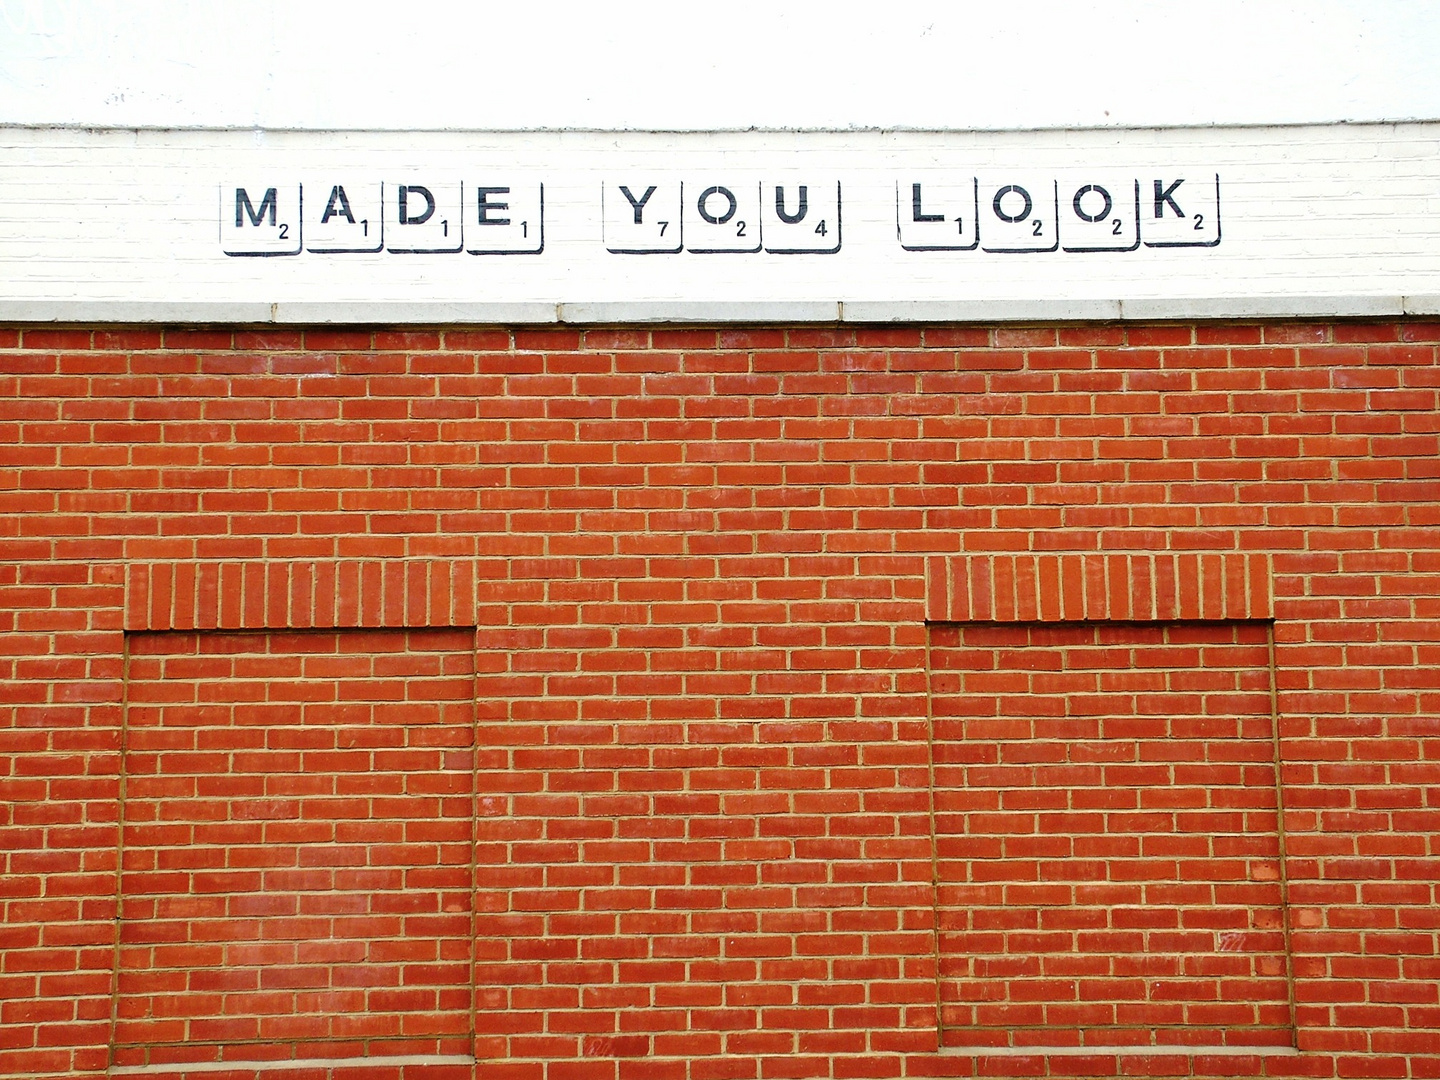 Made you look